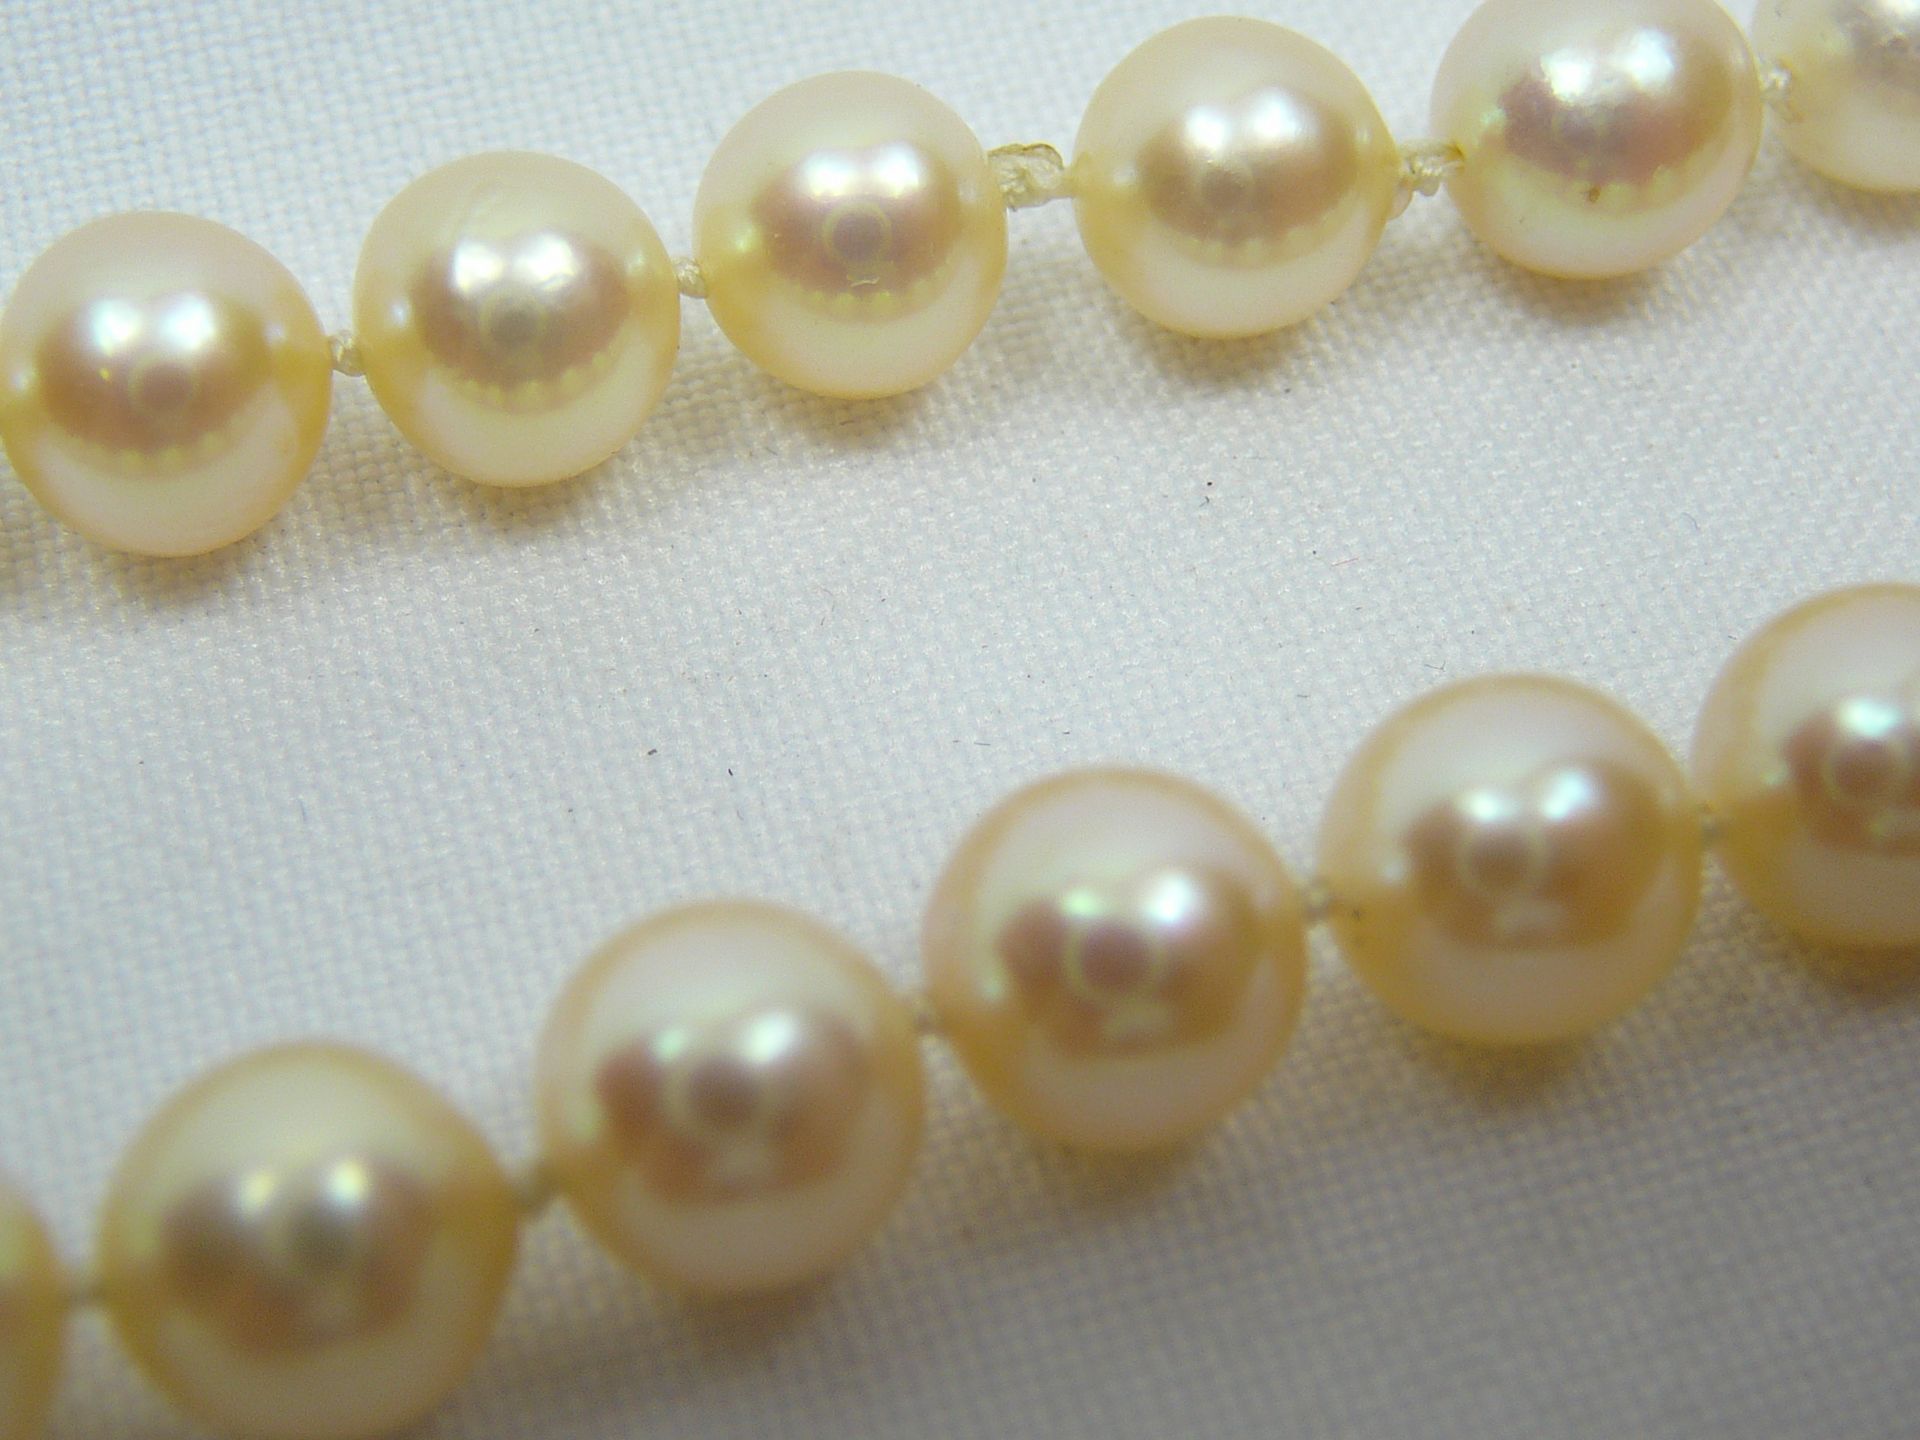 18ct diamond pearl necklace - Image 3 of 4